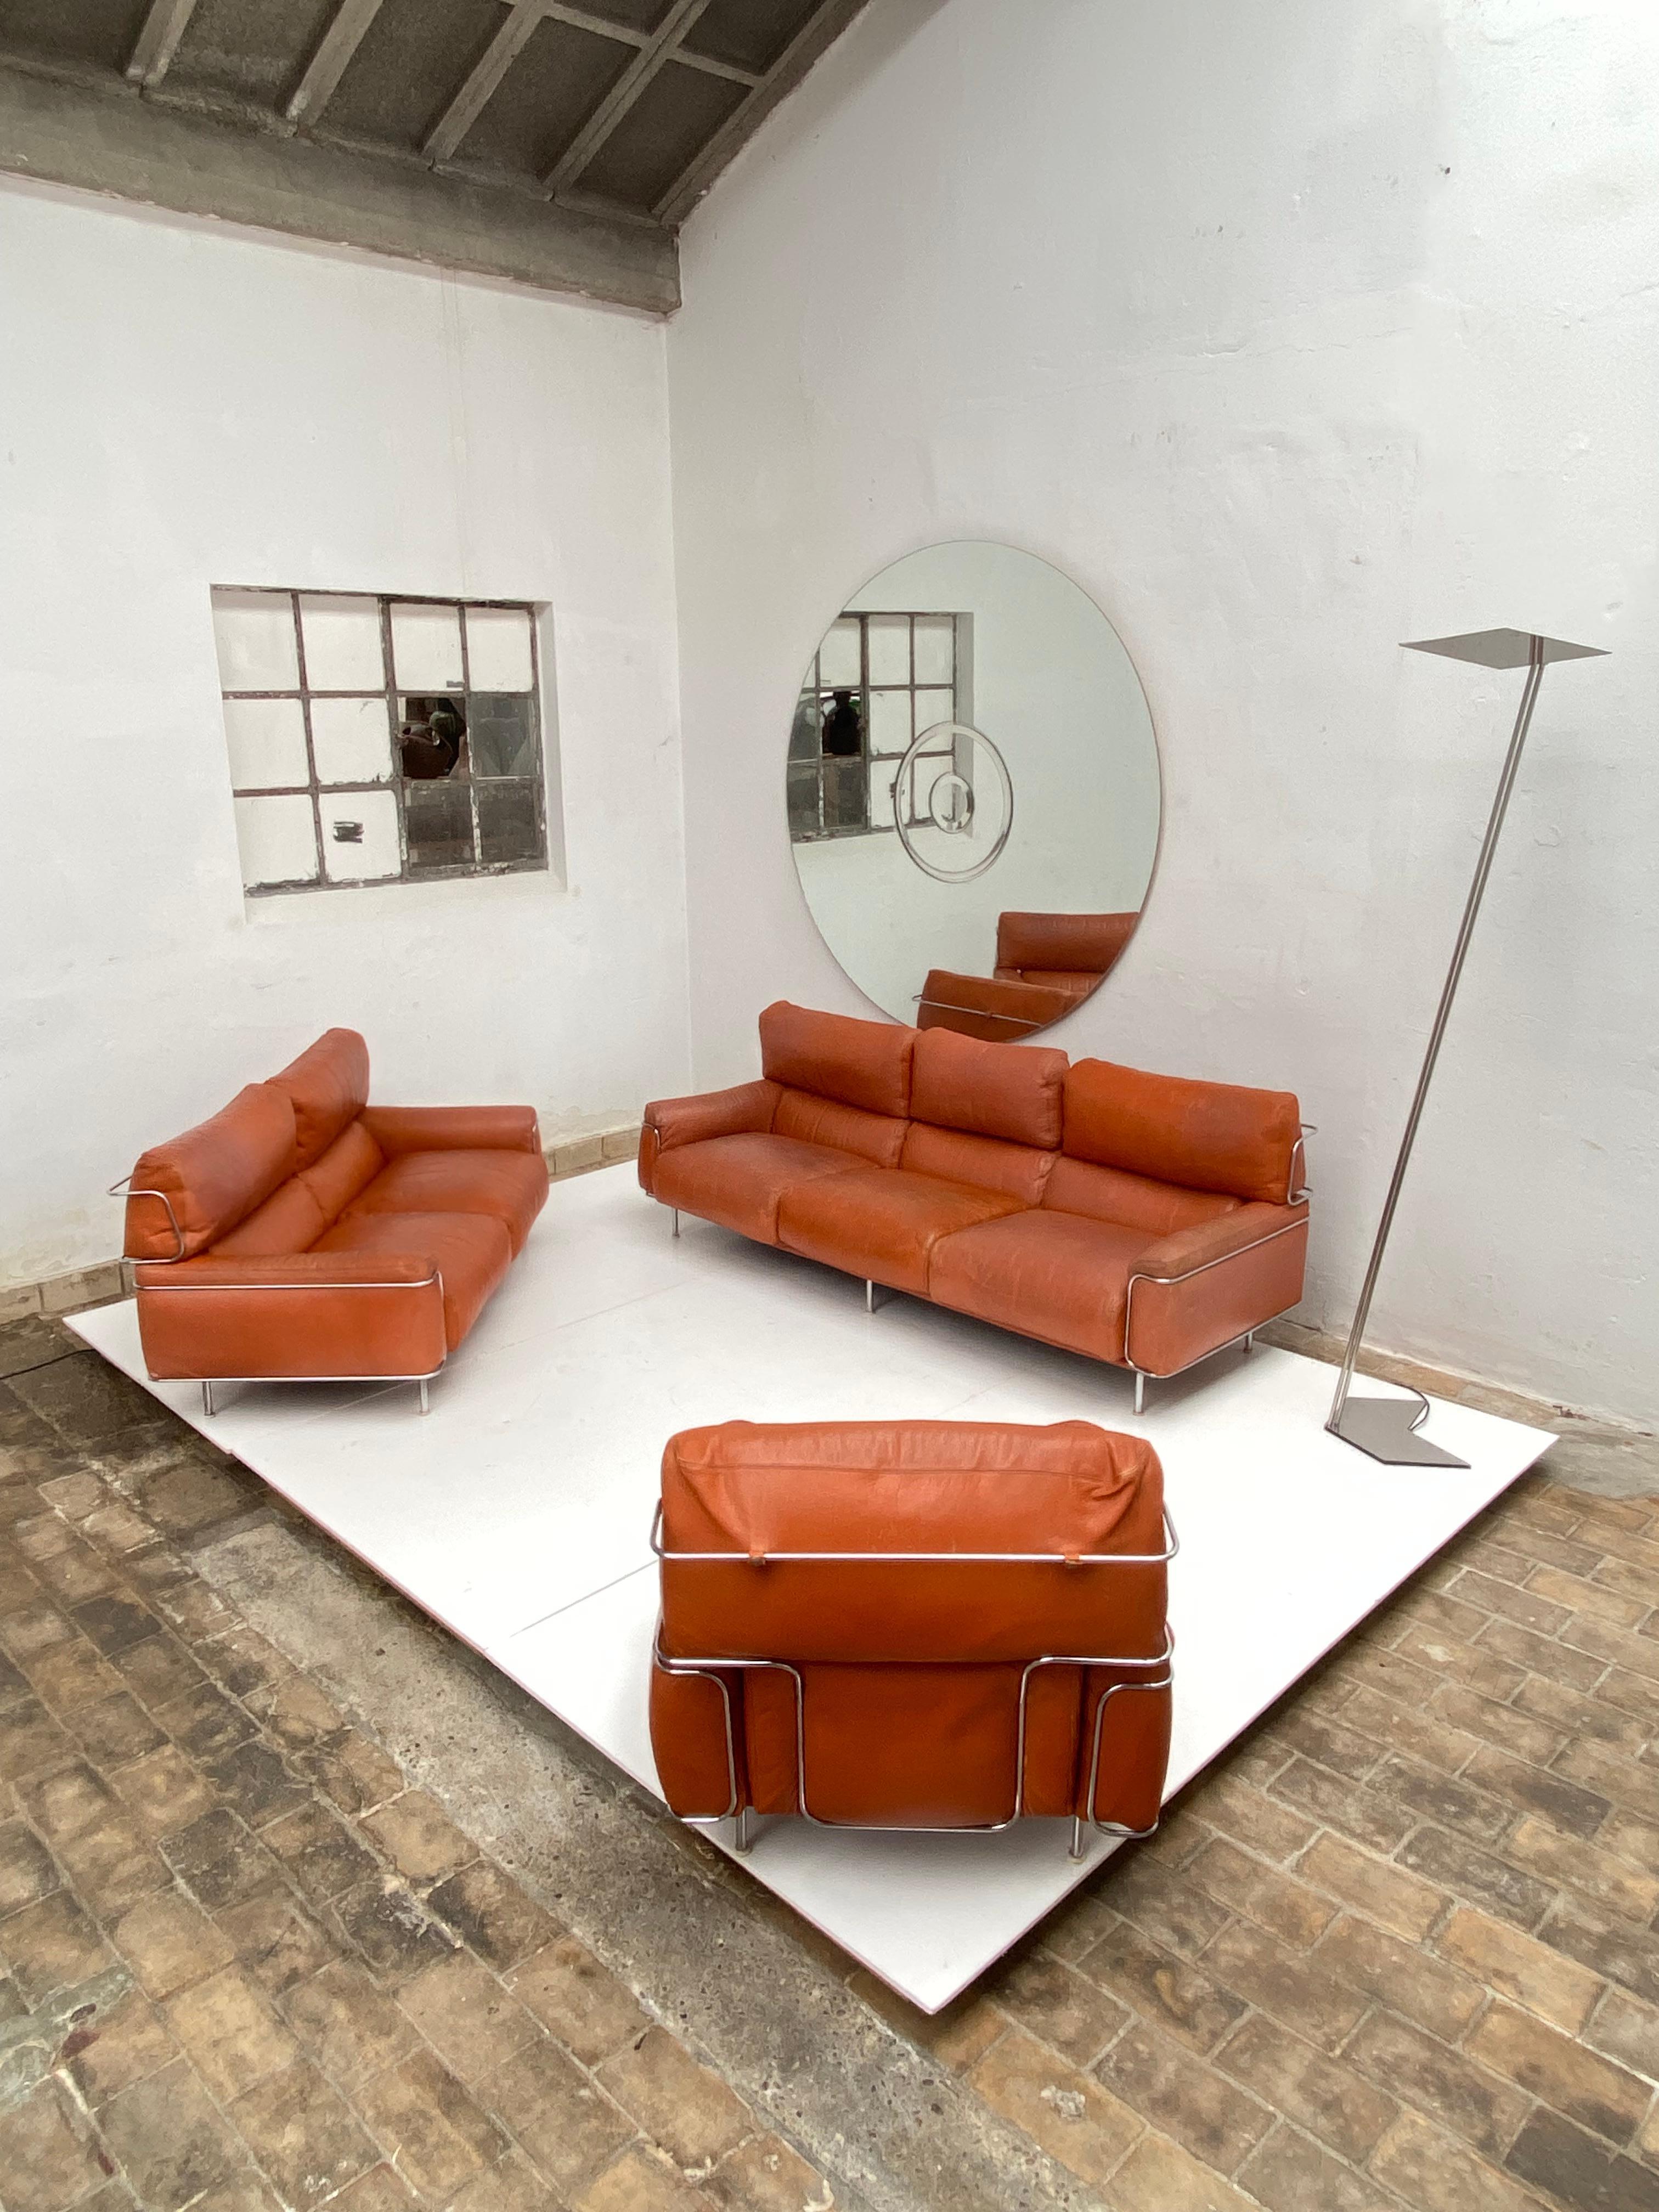 Very Rare Vittorio Introini Leather Sofa Set by Saporiti, Italy, 1968 Published In Good Condition For Sale In bergen op zoom, NL